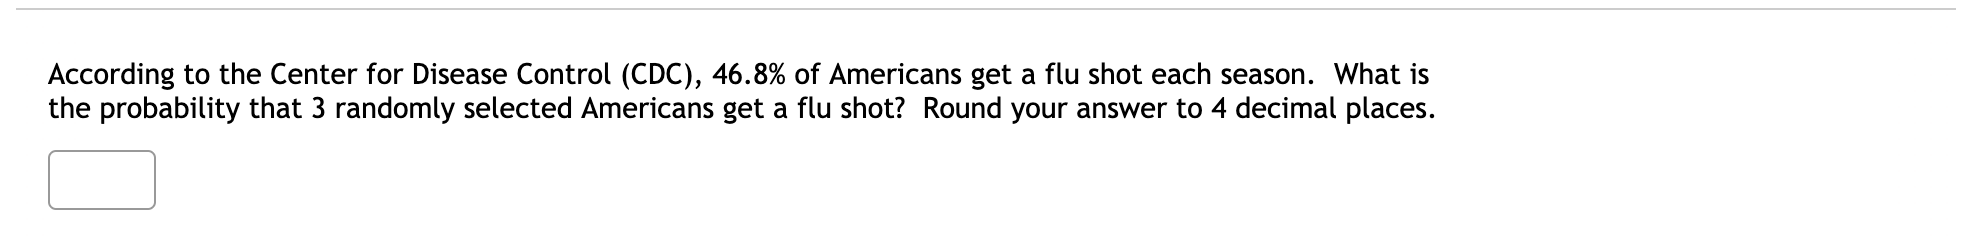 According to the Center for Disease Control (CDC), 46.8% of Americans get a flu shot each season. What is
the probability that 3 randomly selected Americans get a flu shot? Round your answer to 4 decimal places.
